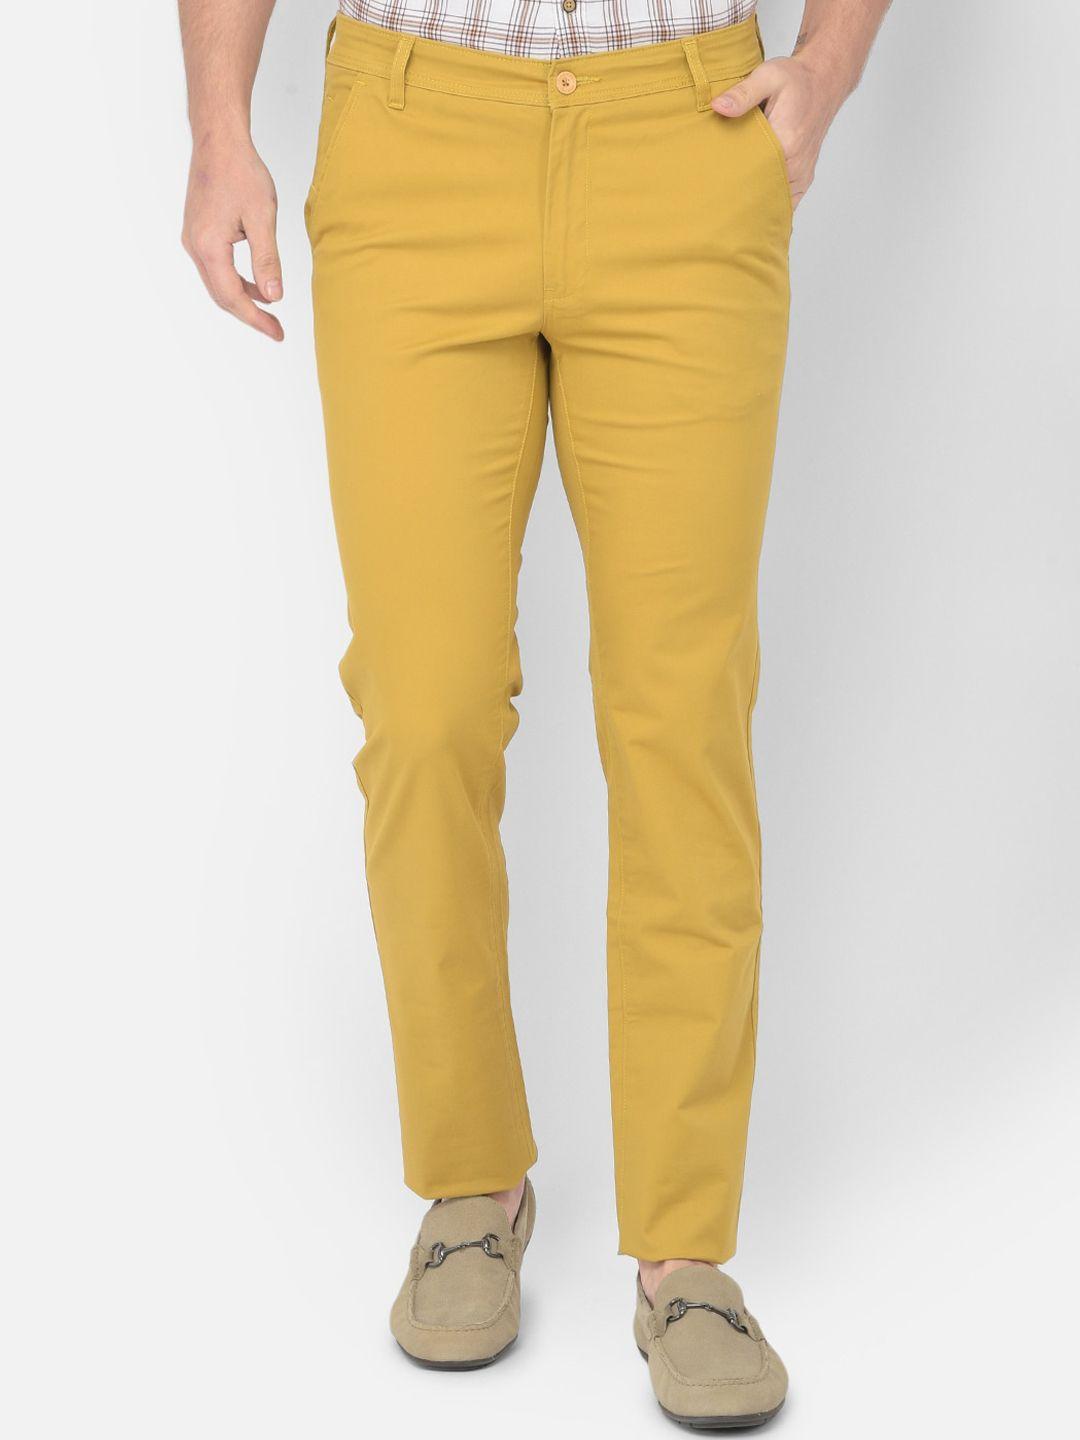 canary london men mustard yellow smart slim fit wrinkle free chinos trousers